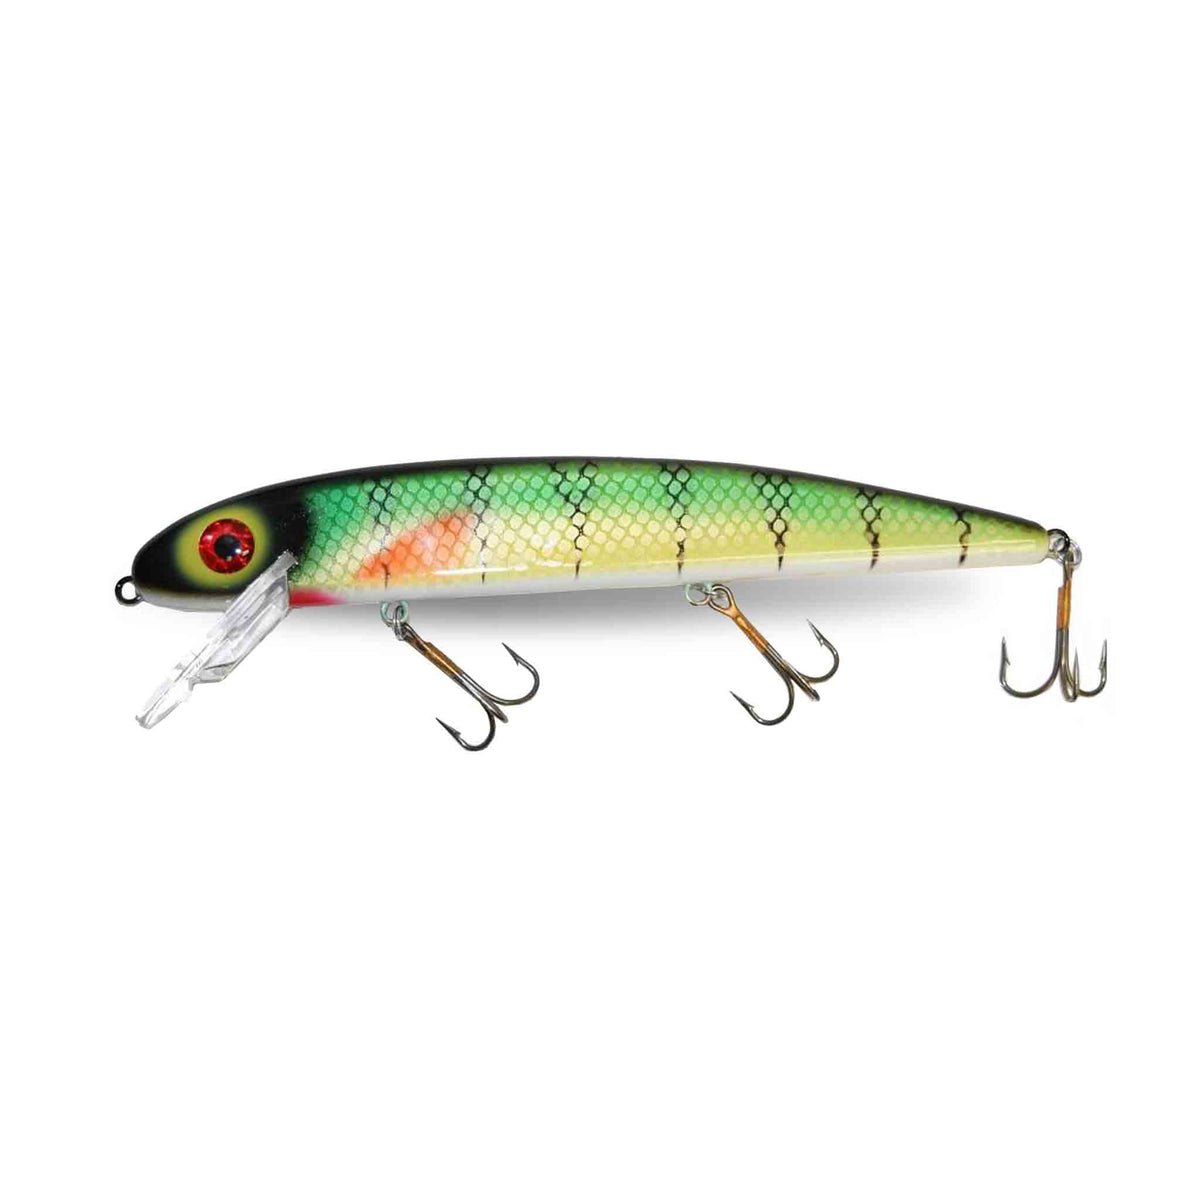 View of Crankbaits Musky Mania Tackle Jake 8'' Crankbait Perch available at EZOKO Pike and Musky Shop